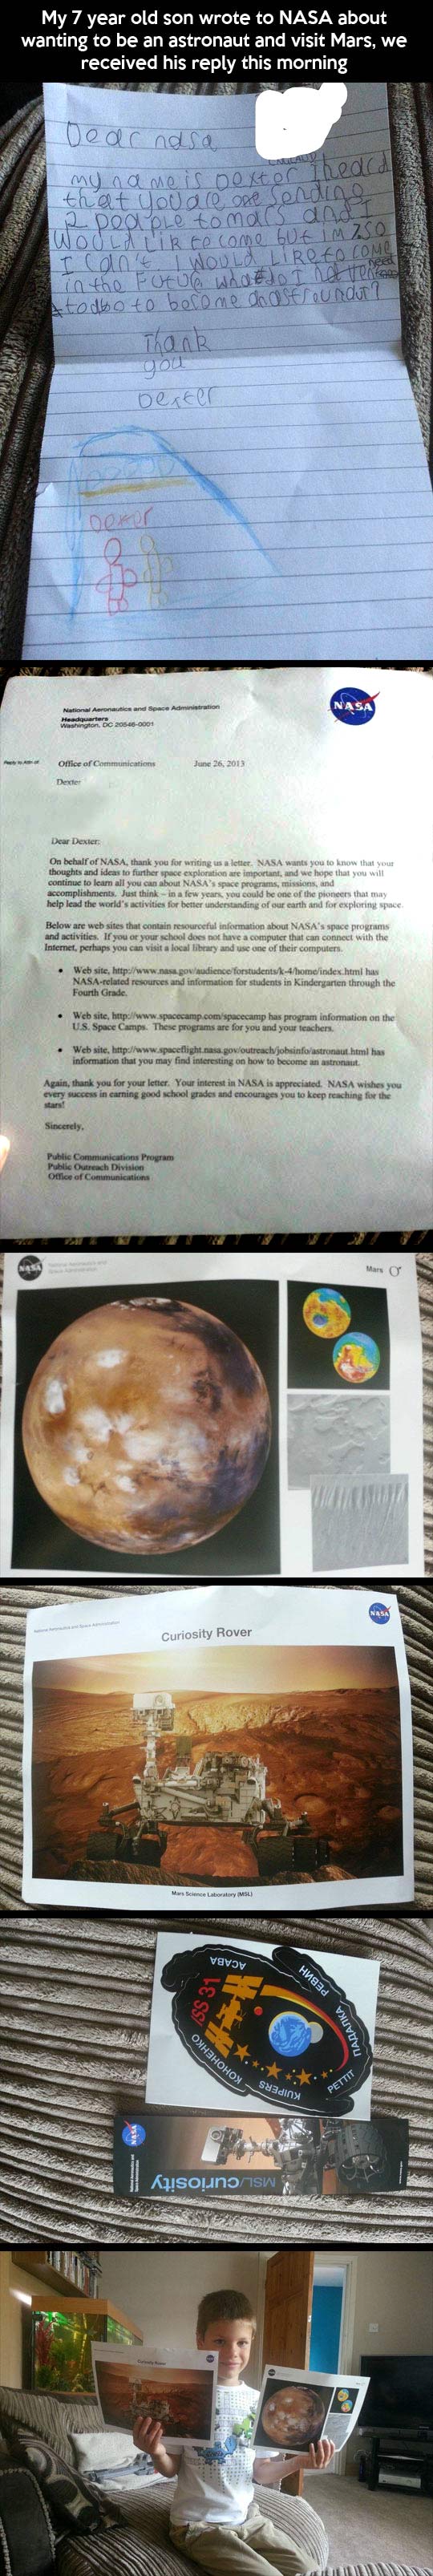 Writing letters to NASA.